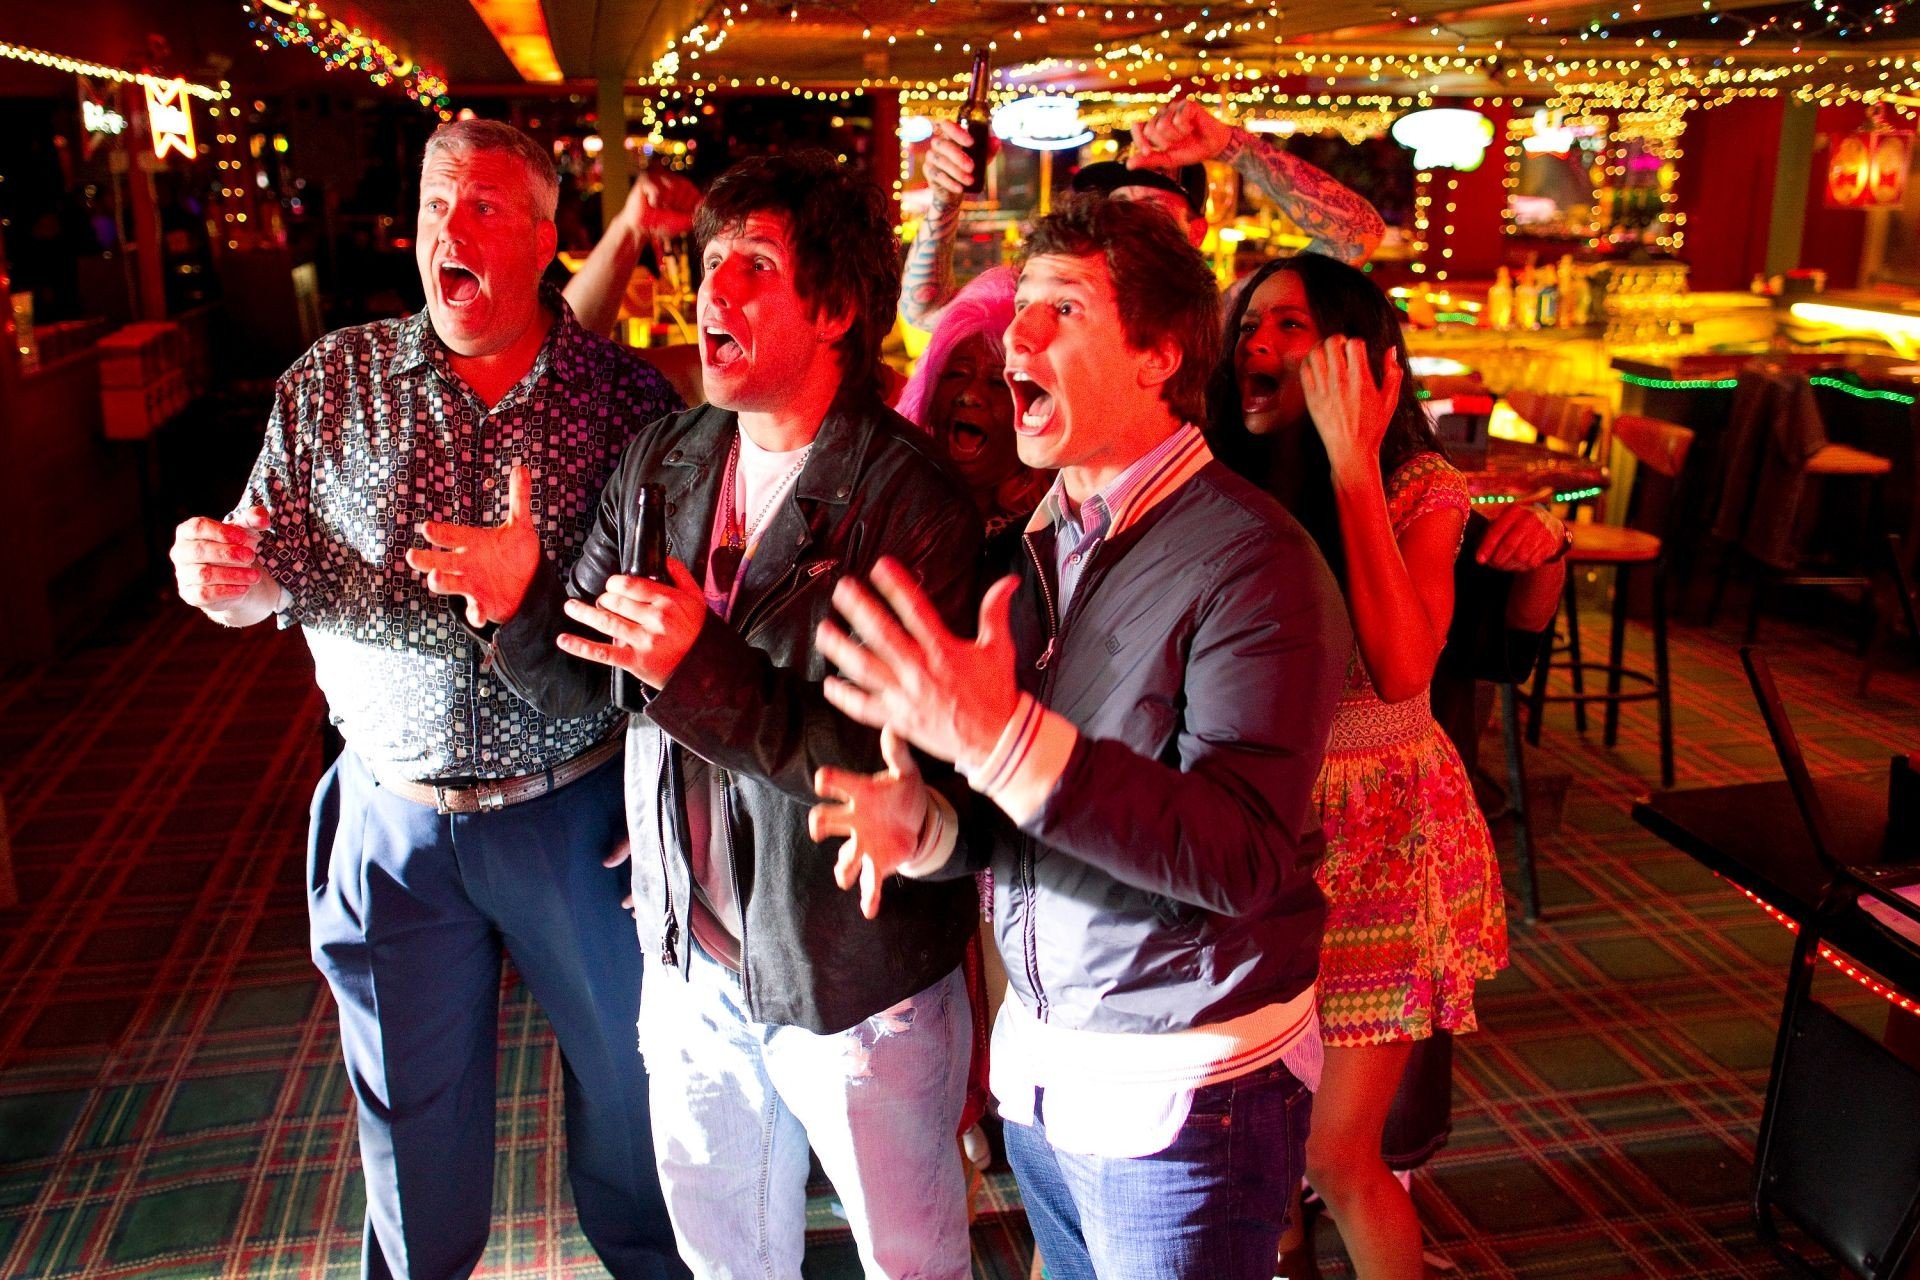 Rex Ryan, Adam Sandler and Andy Samberg in Columbia Pictures' That's My Boy (2012). Photo credit by Tracy Bennett.